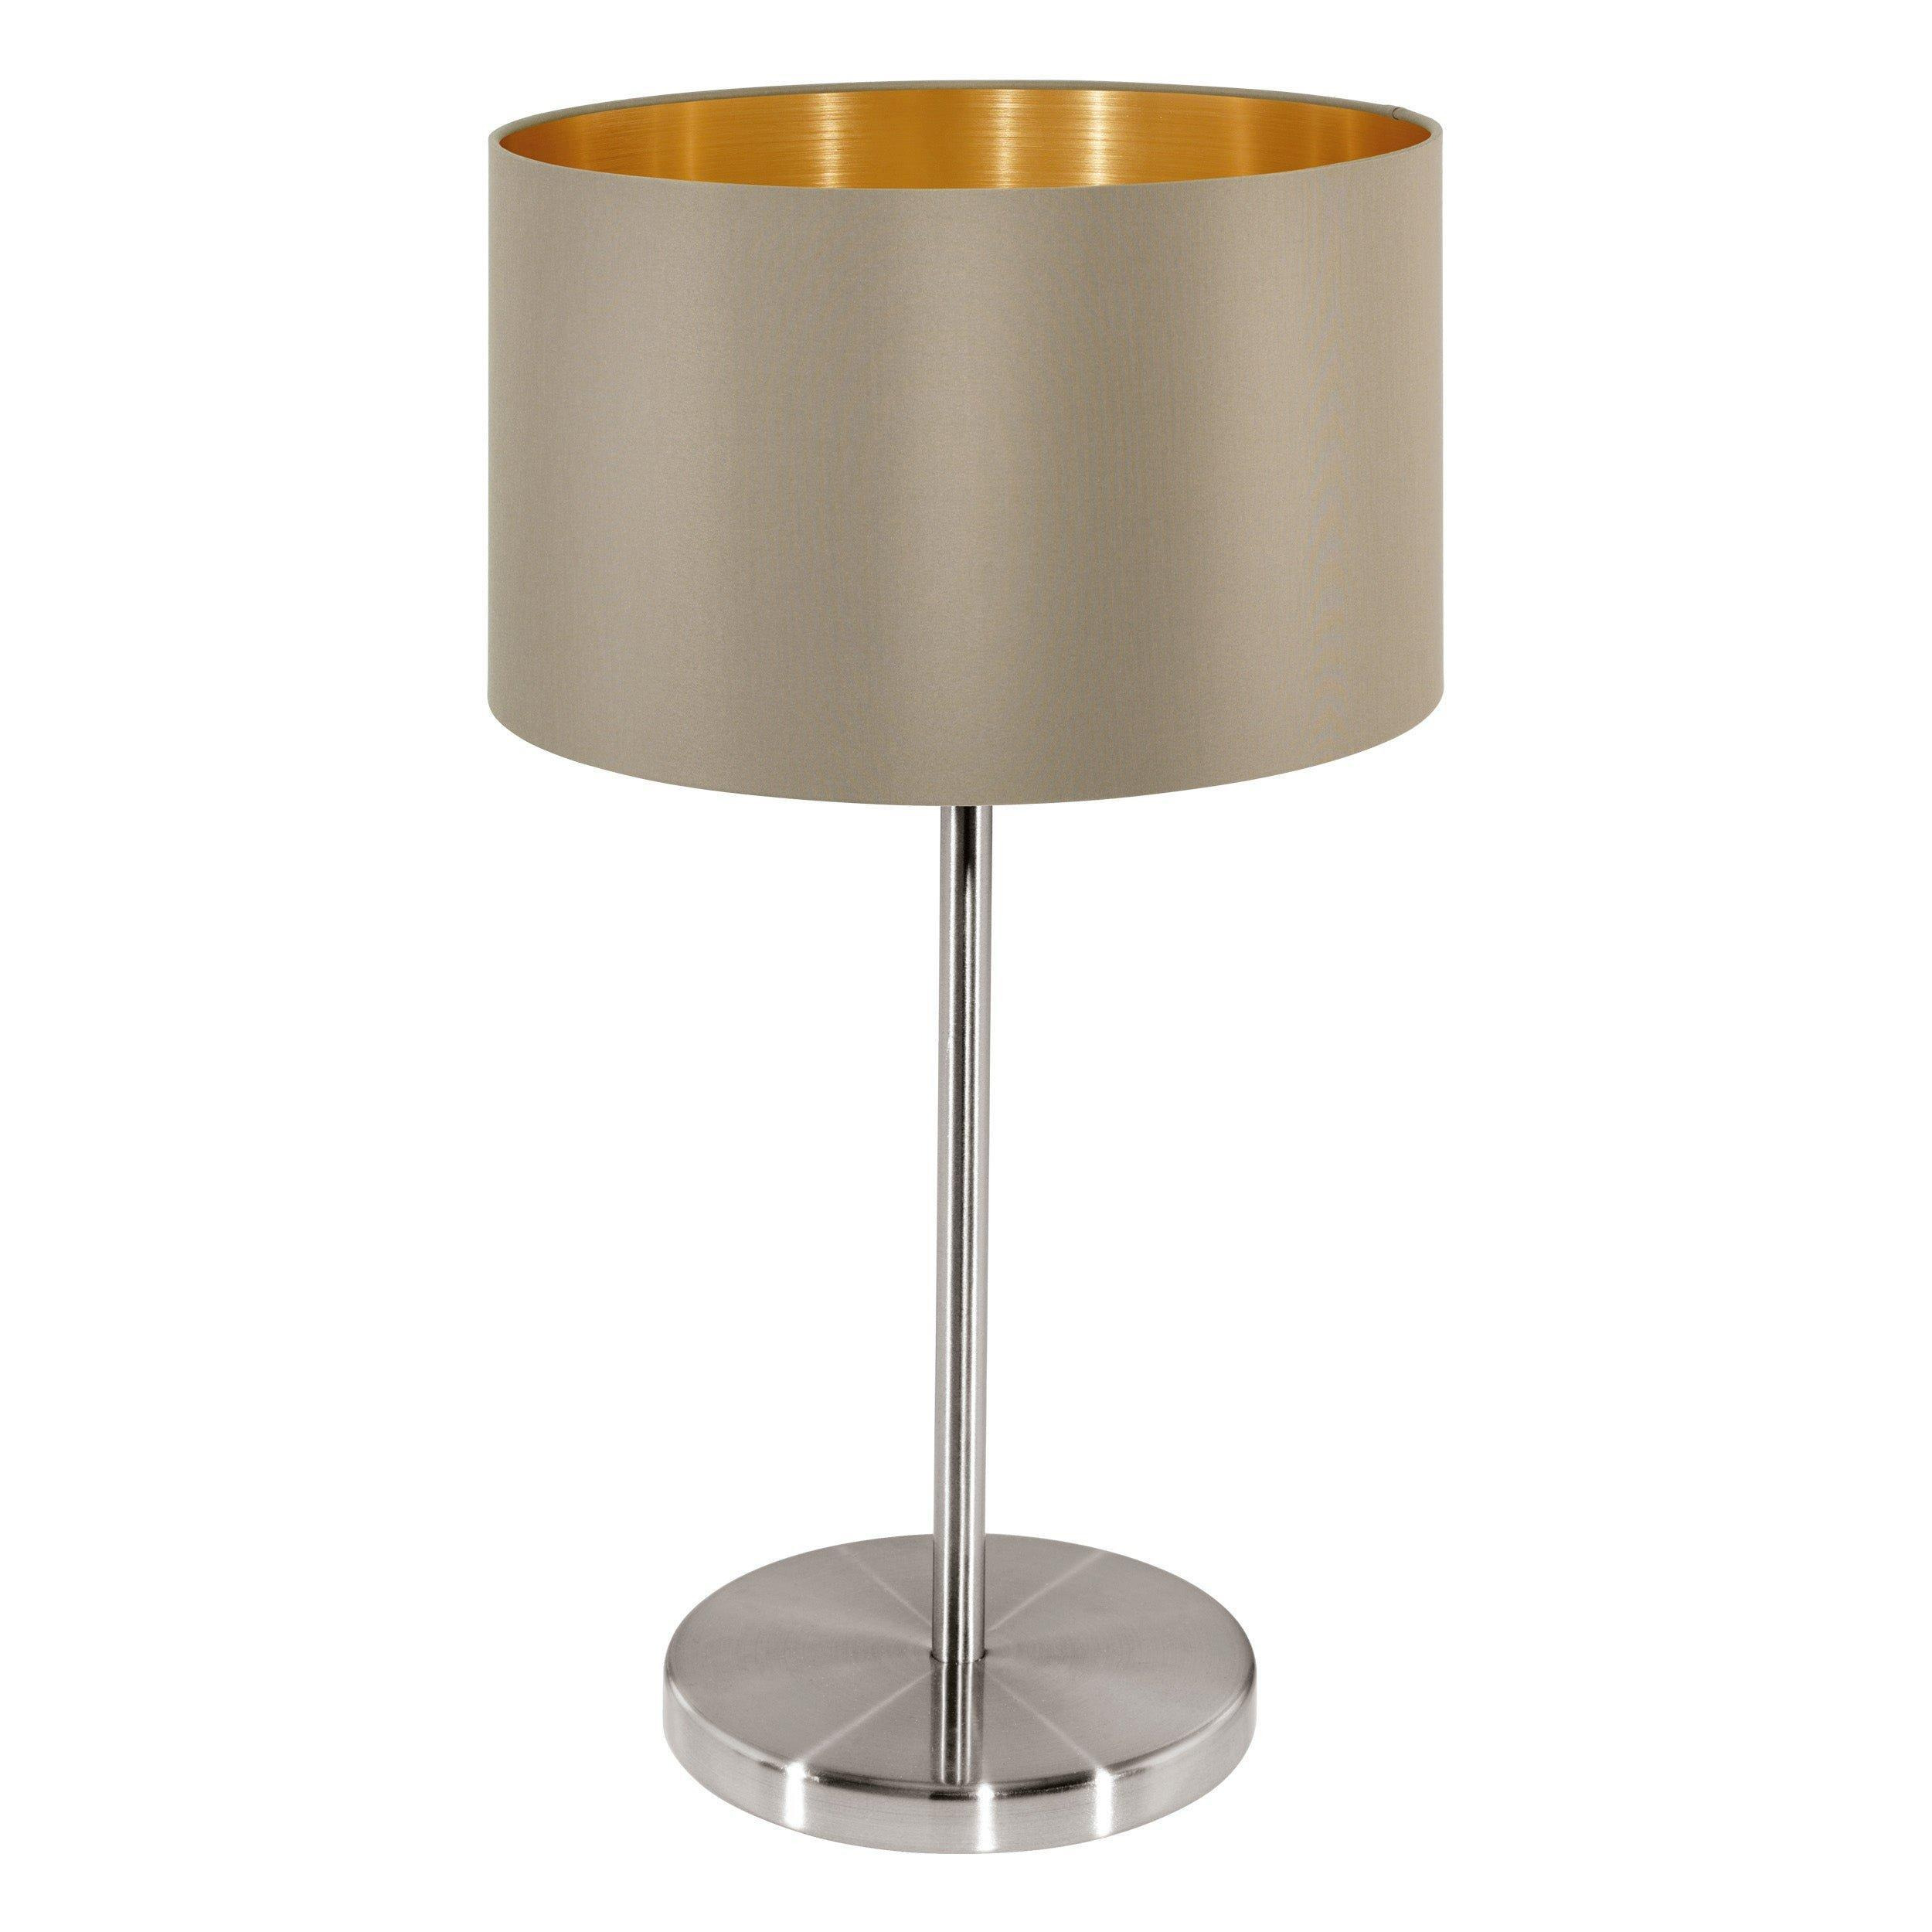 Table Lamp Colour Satin Nickel Steel Shade Taupe Gold Fabric Bulb E27 1x60W - image 1